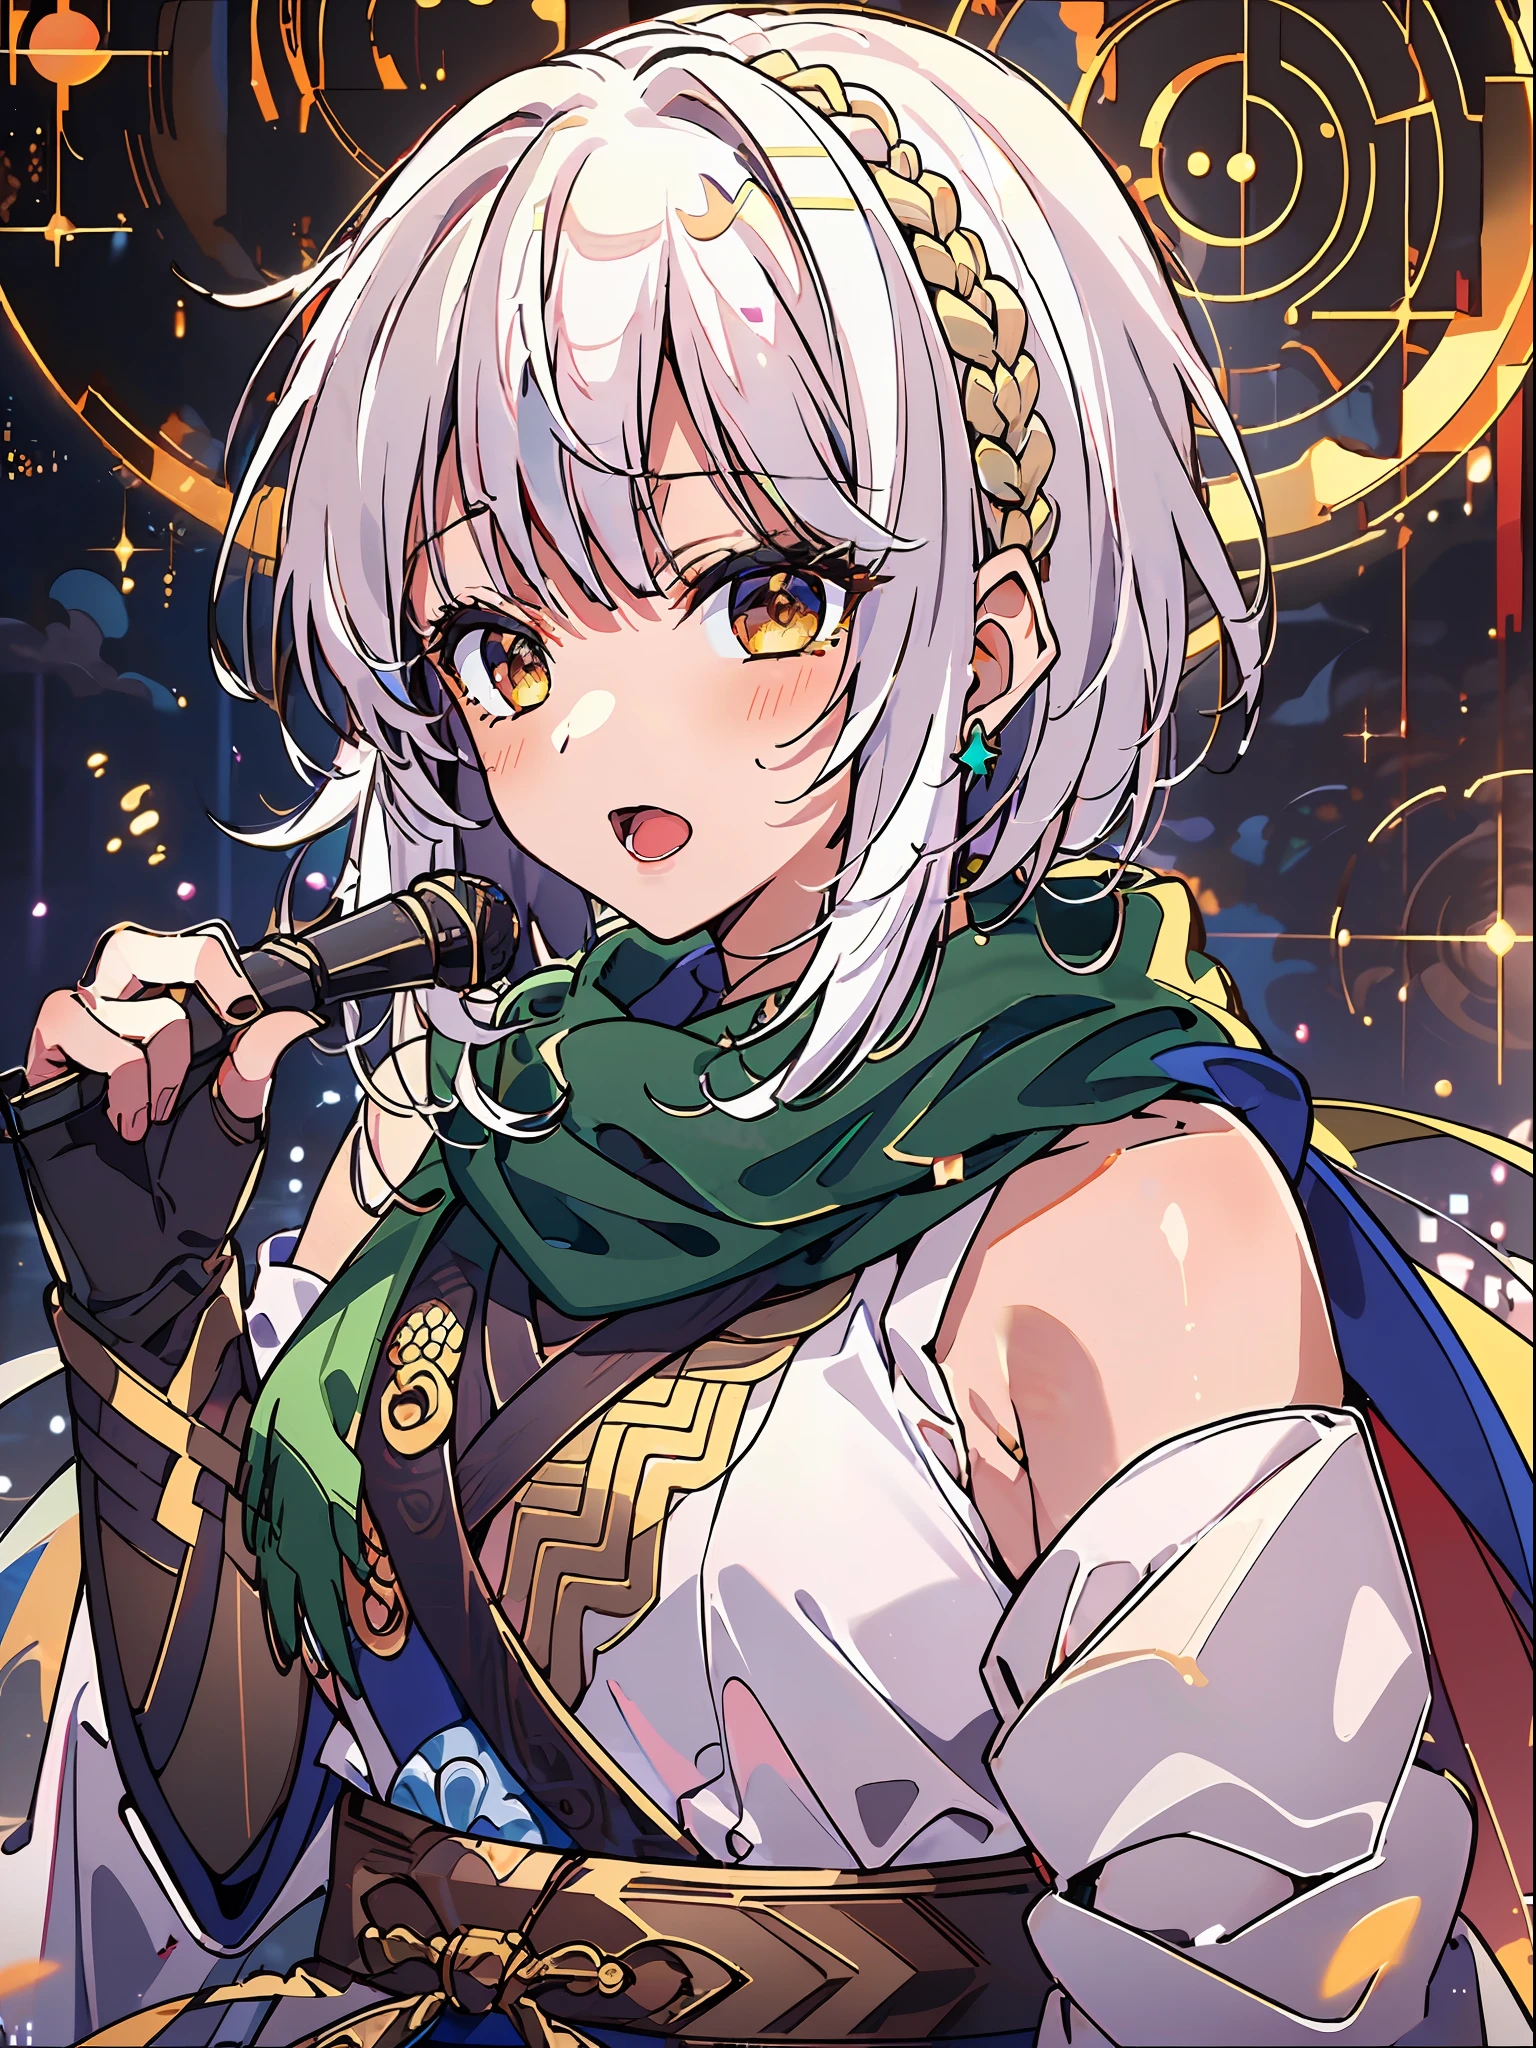 PIXIV, glowing,(((Taoist))),Virtual YouTuber, No gloves,Upper body,Slightly open mouth,bangs,Blush,hair between eye,yellow decoration,Kana_arima\(oshinoko\),Short hair,Shining eyes,((White idol costume)),((White idol costume)),Scarf,(((Green_Scarf))),(((green scarf))), green hairclip, Radiant eyes, Sing with your mouth open,(((White hair))), ((french braid)),(((brown horns))),(((Golden yellow eyes))),(holding black microphone),(Golden light ),((Singing)),aiming at viewer,((Point one finger at the viewer)),Striped hair, ((Star-shaped pupils)),Cloud, sky,stars,hakuou,ninja,ninja suite,black shorts,obi,white sleeve,sandar,solo